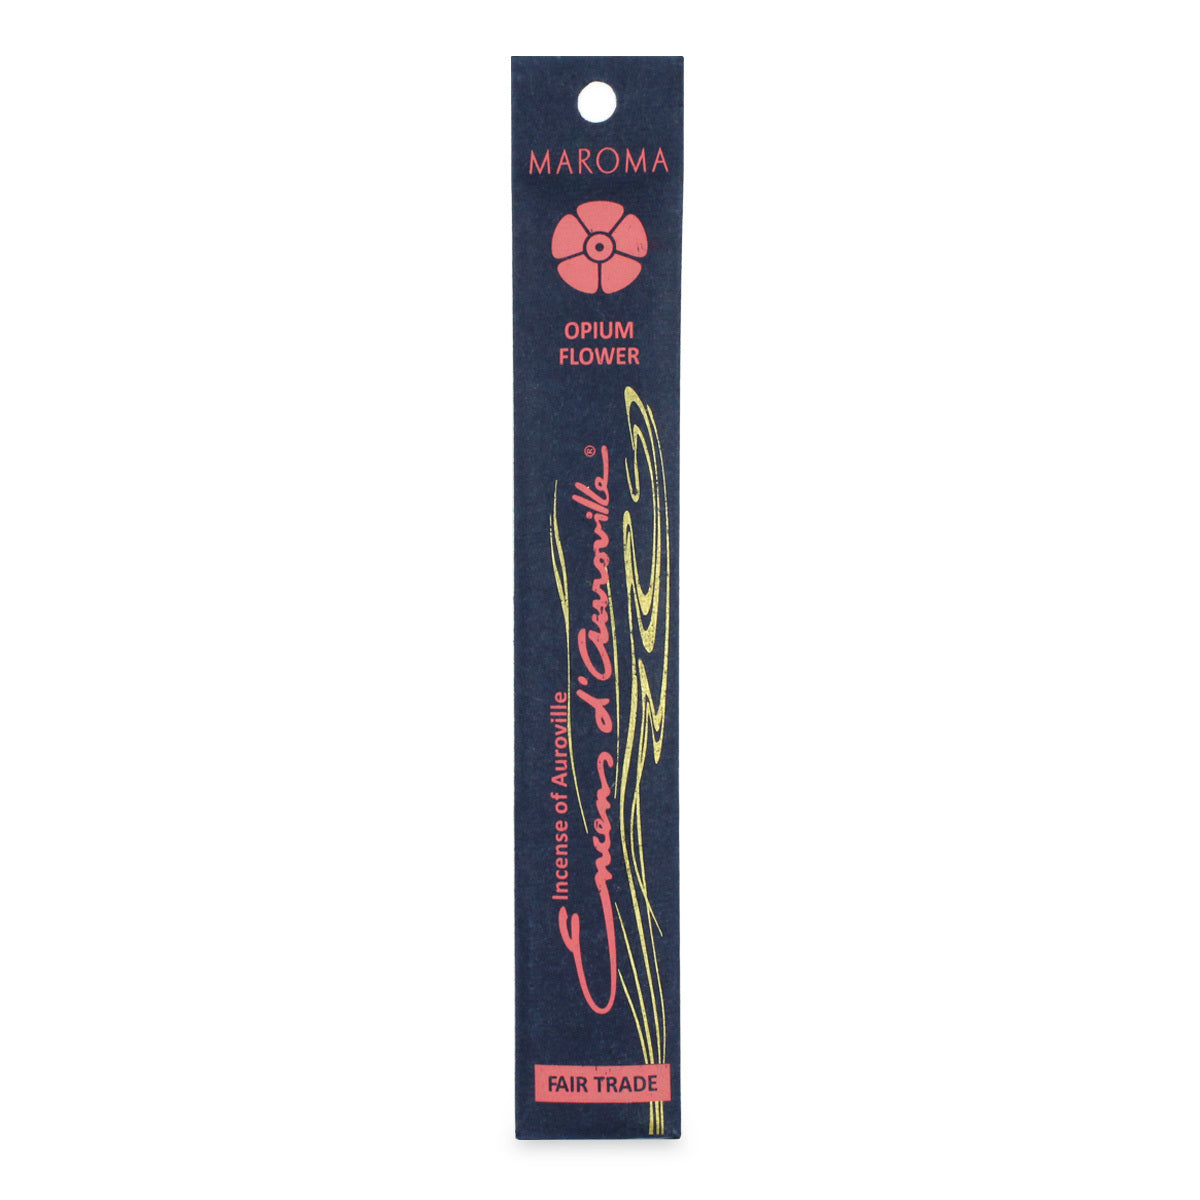 Primary image of Opium Flower Incense